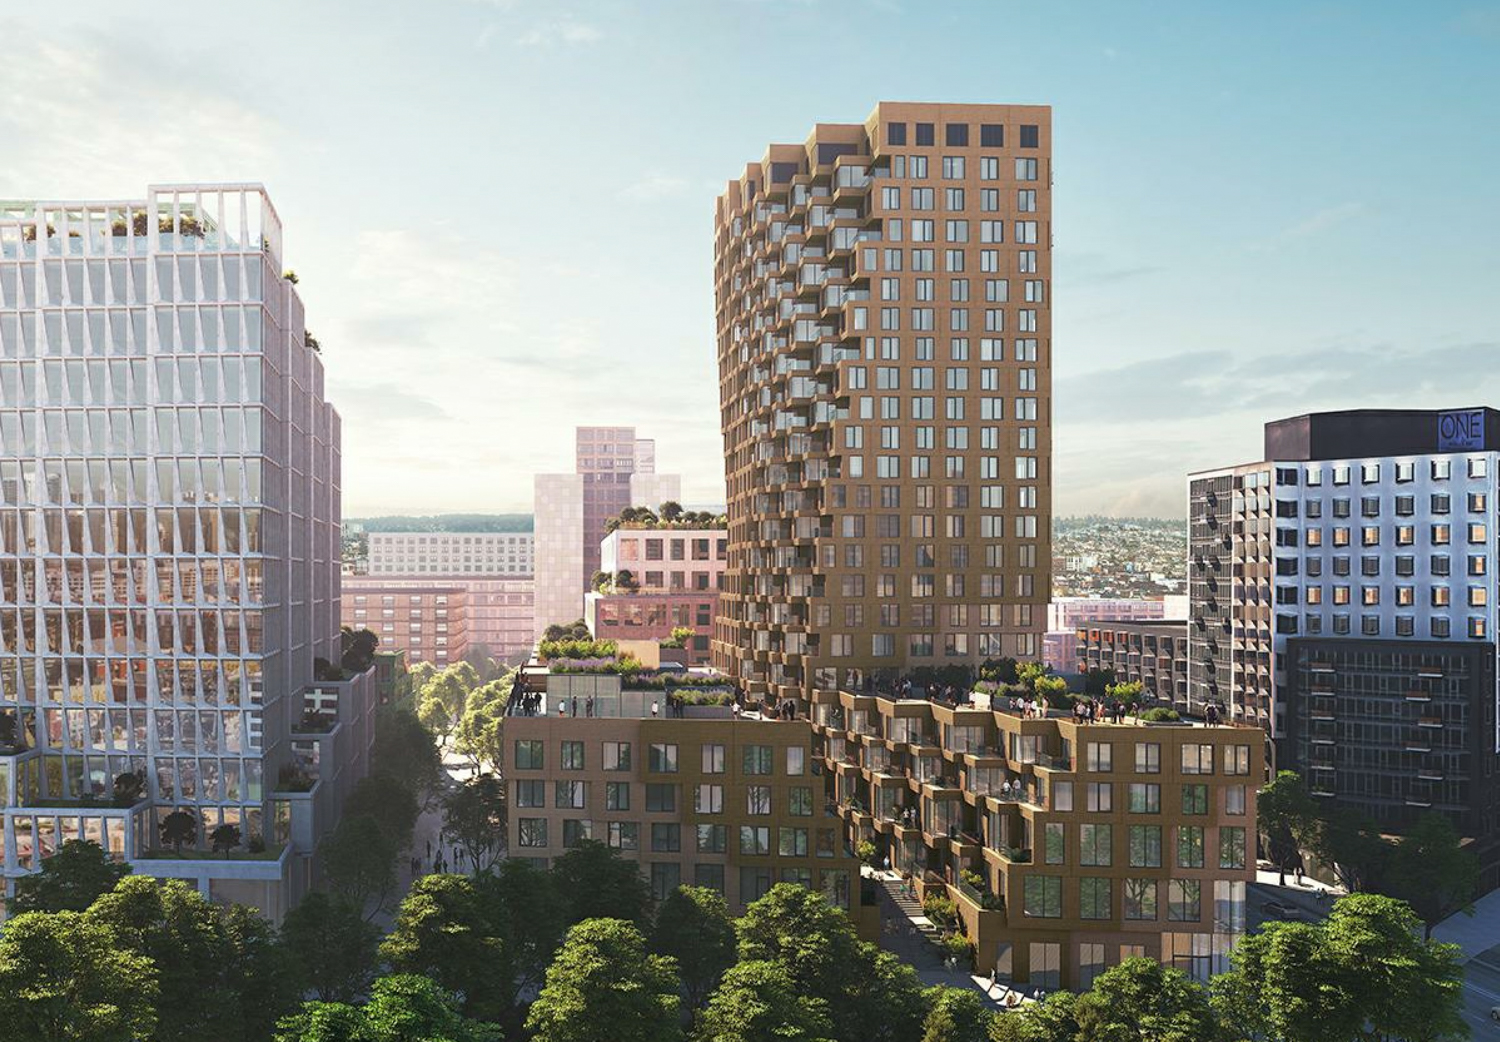 The Canyon aerial perspective, design by MVRDV